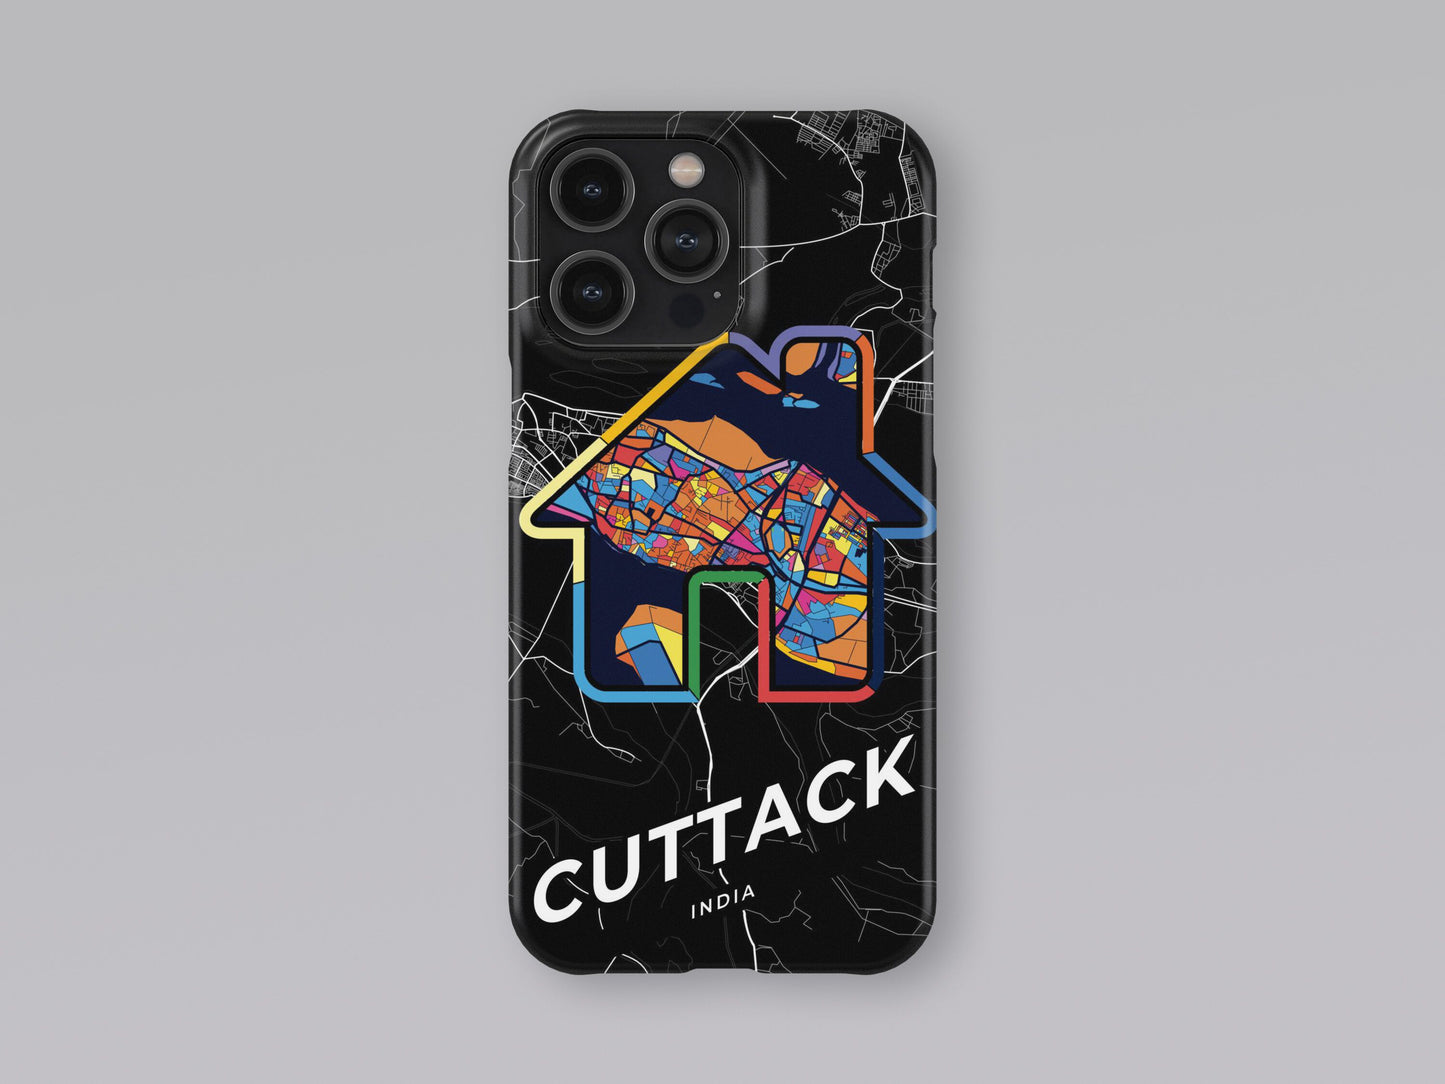 Cuttack India slim phone case with colorful icon. Birthday, wedding or housewarming gift. Couple match cases. 3